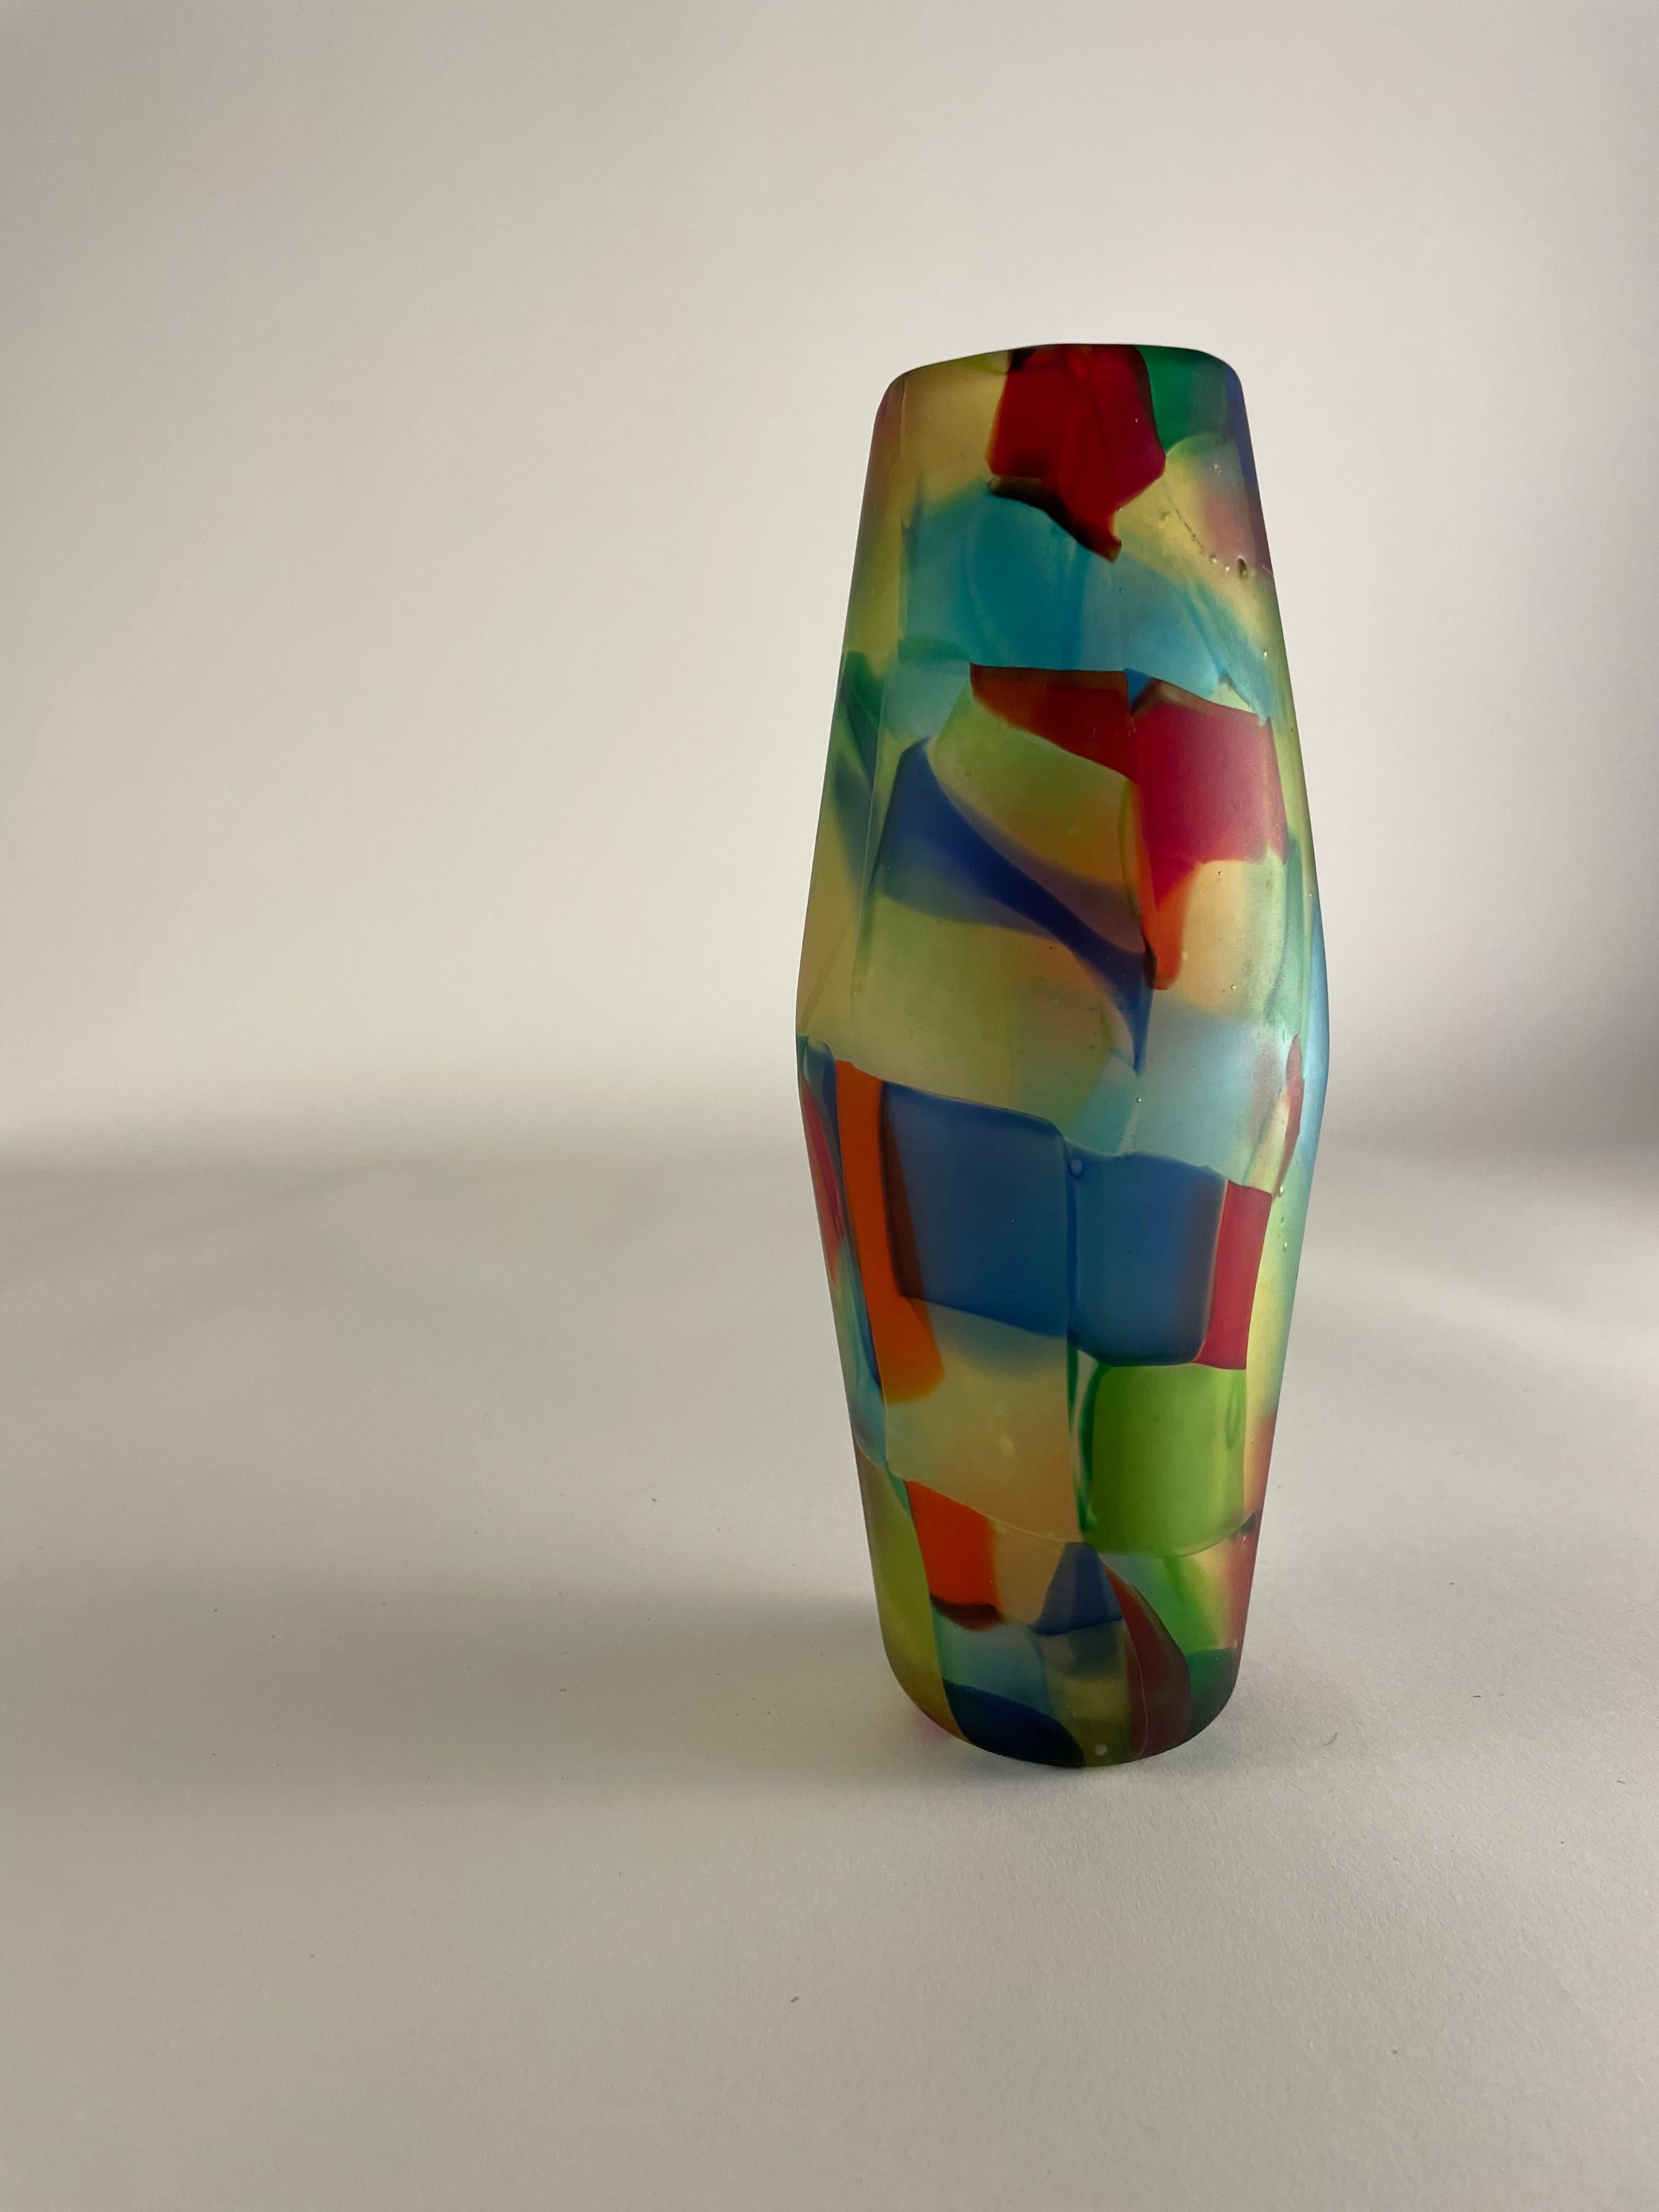 Looking for an eclectic, artistic attitude to add to your home decor? Look no further than the Farfalle vase by Pollio Perelda for Fratelli Toso. This beautiful Murano glass piece is a reinterpretation of classic murrina style, updated for a more